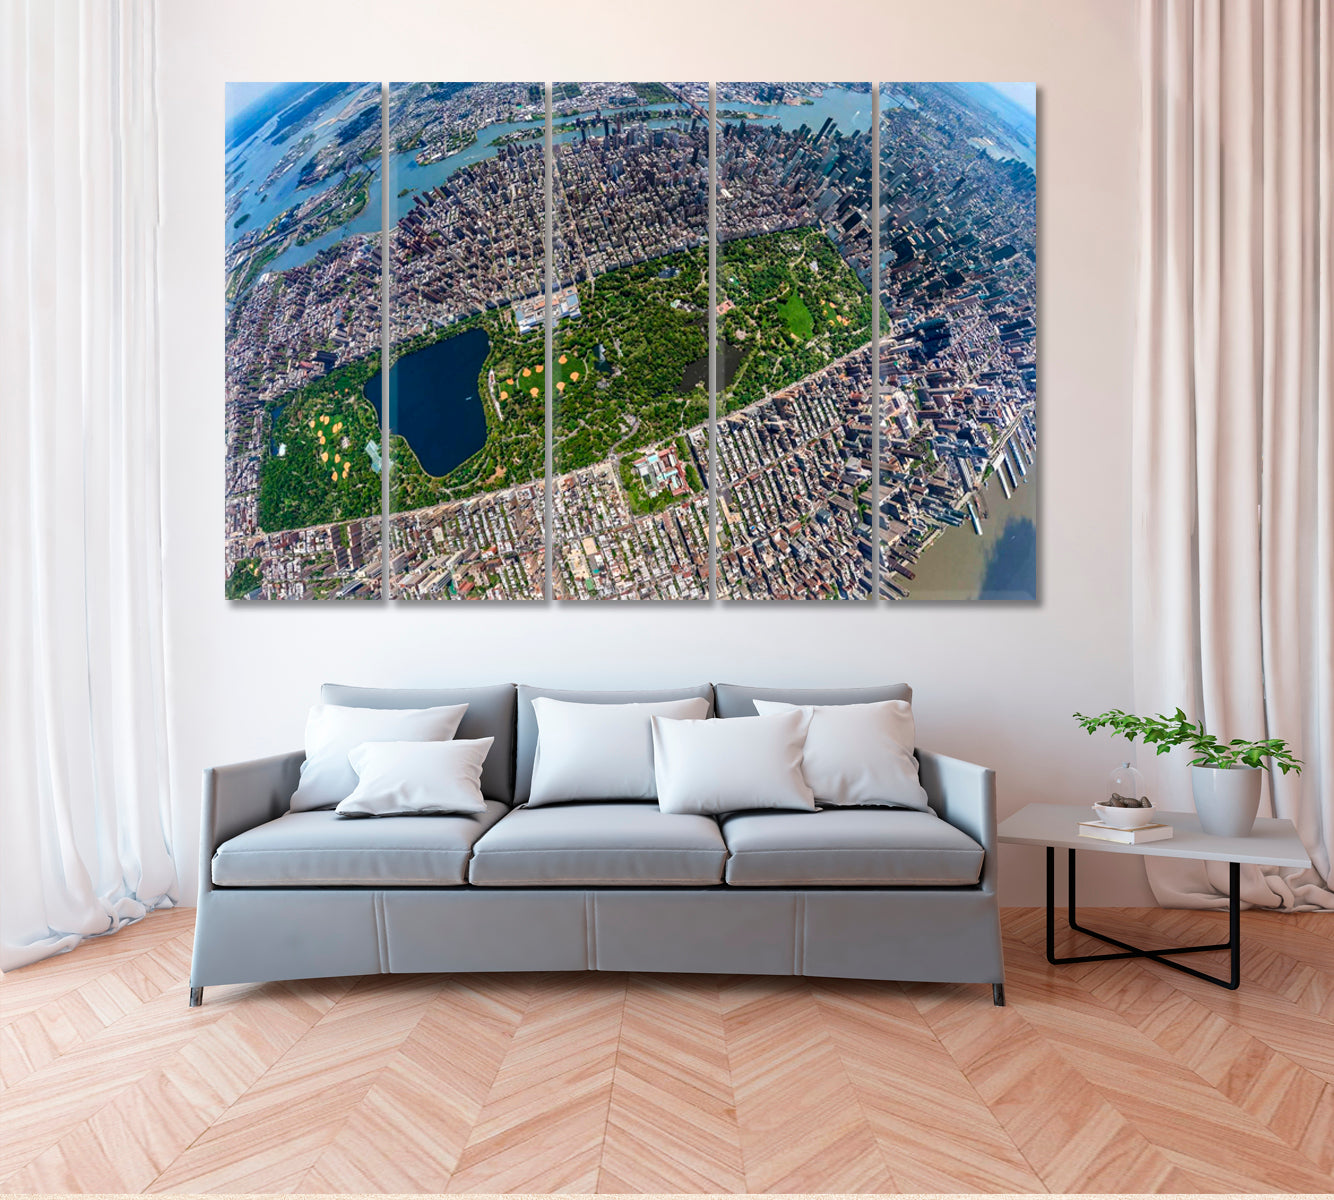 Central Park Manhattan NY Aerial View Canvas Print ArtLexy 5 Panels 36"x24" inches 